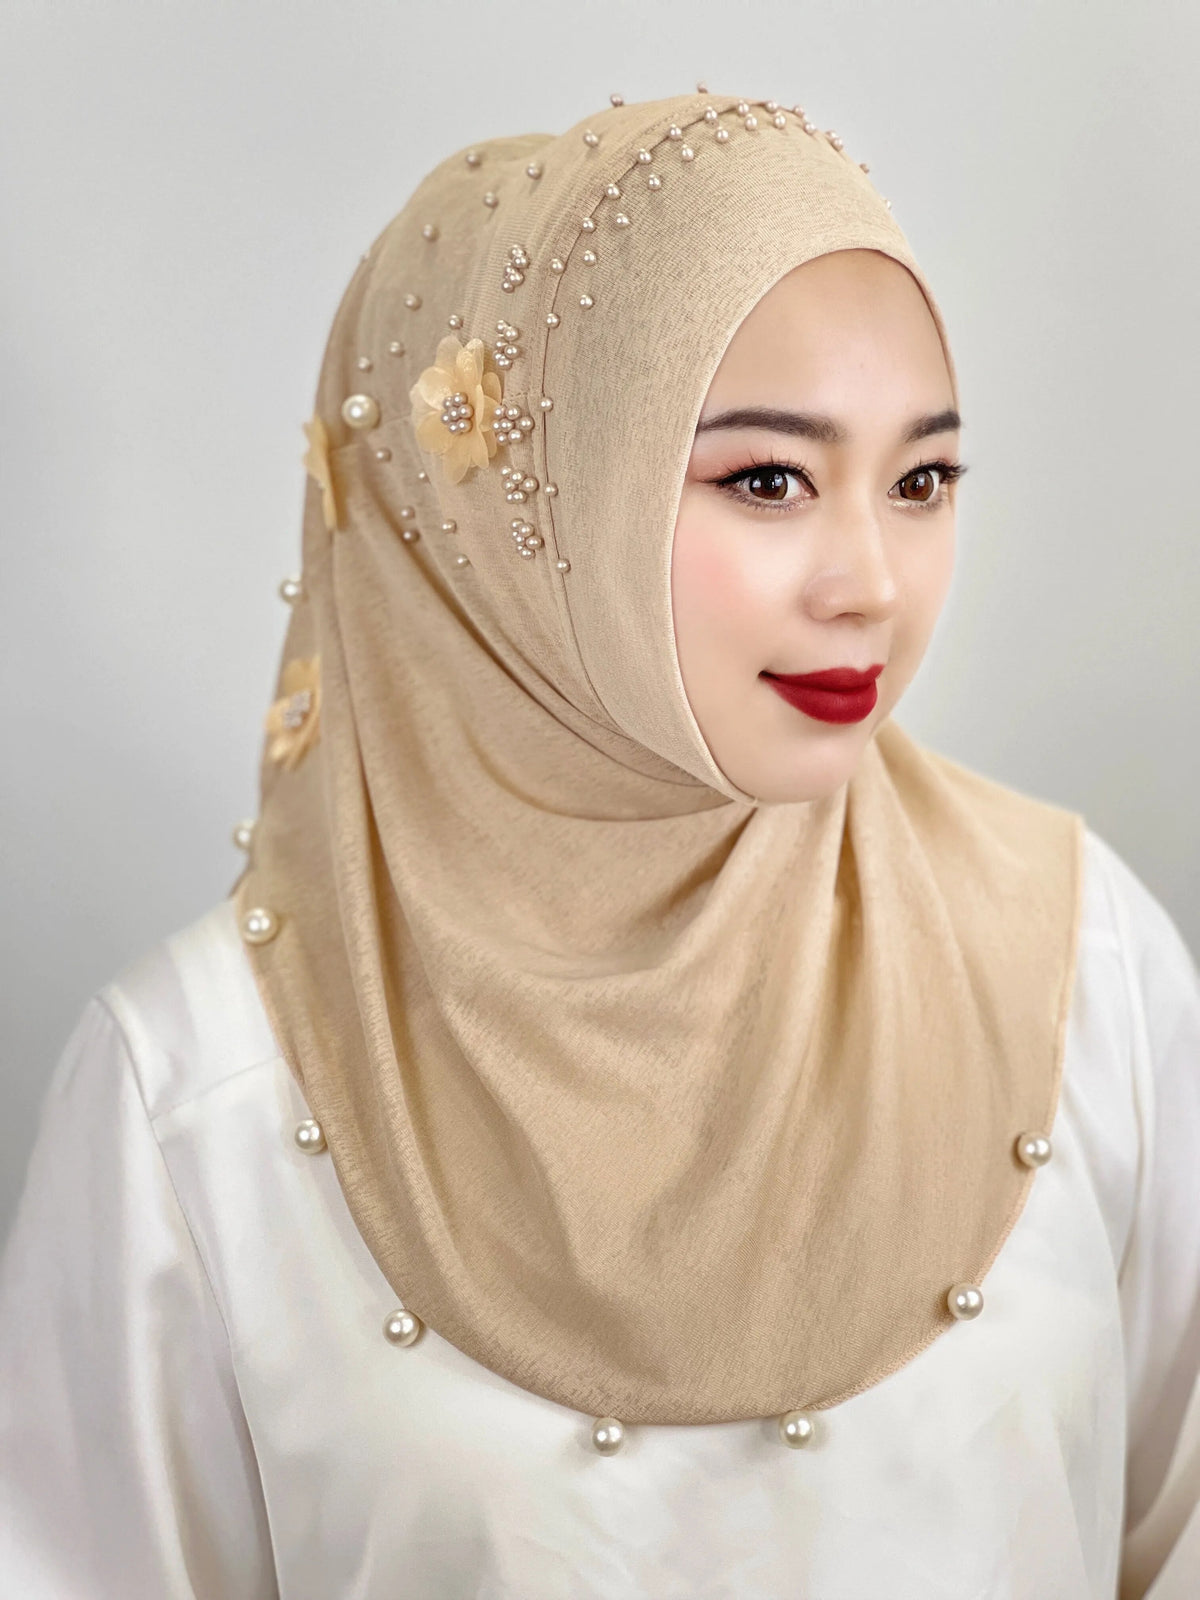 On sale - Muslim Beaded Hijab - 7 Colours - Free shipping -